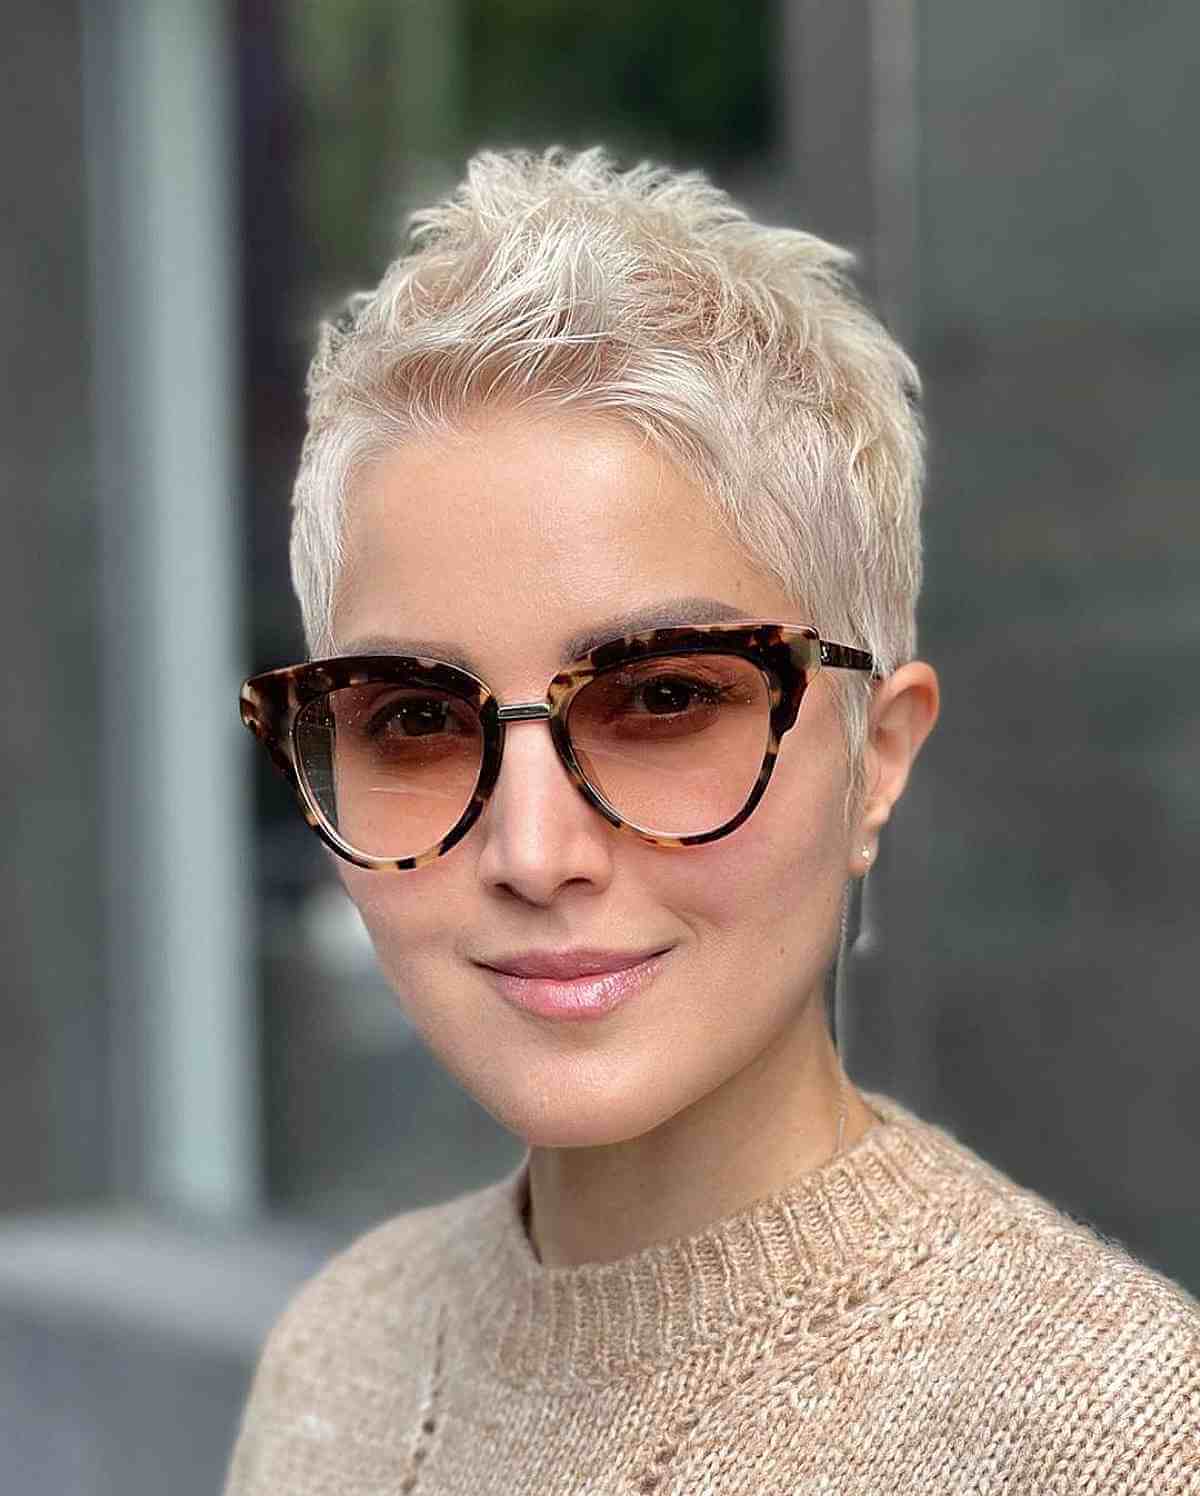 The Perfect Pixie Cut for Women with Oval Faces